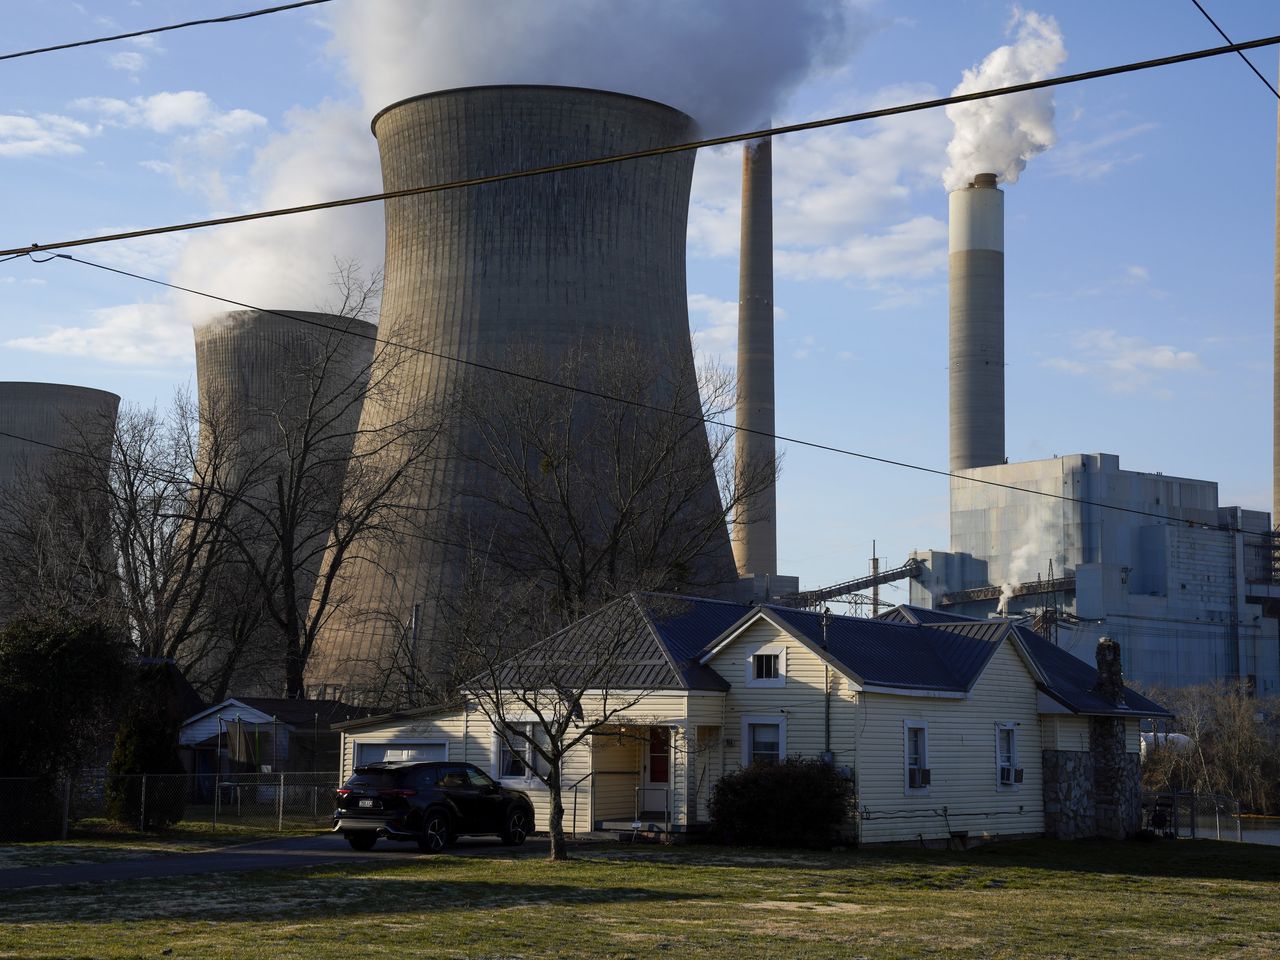 Researchers emphasize the importance of addressing emissions from existing gas plants (Credits: The Wall Street Journal)